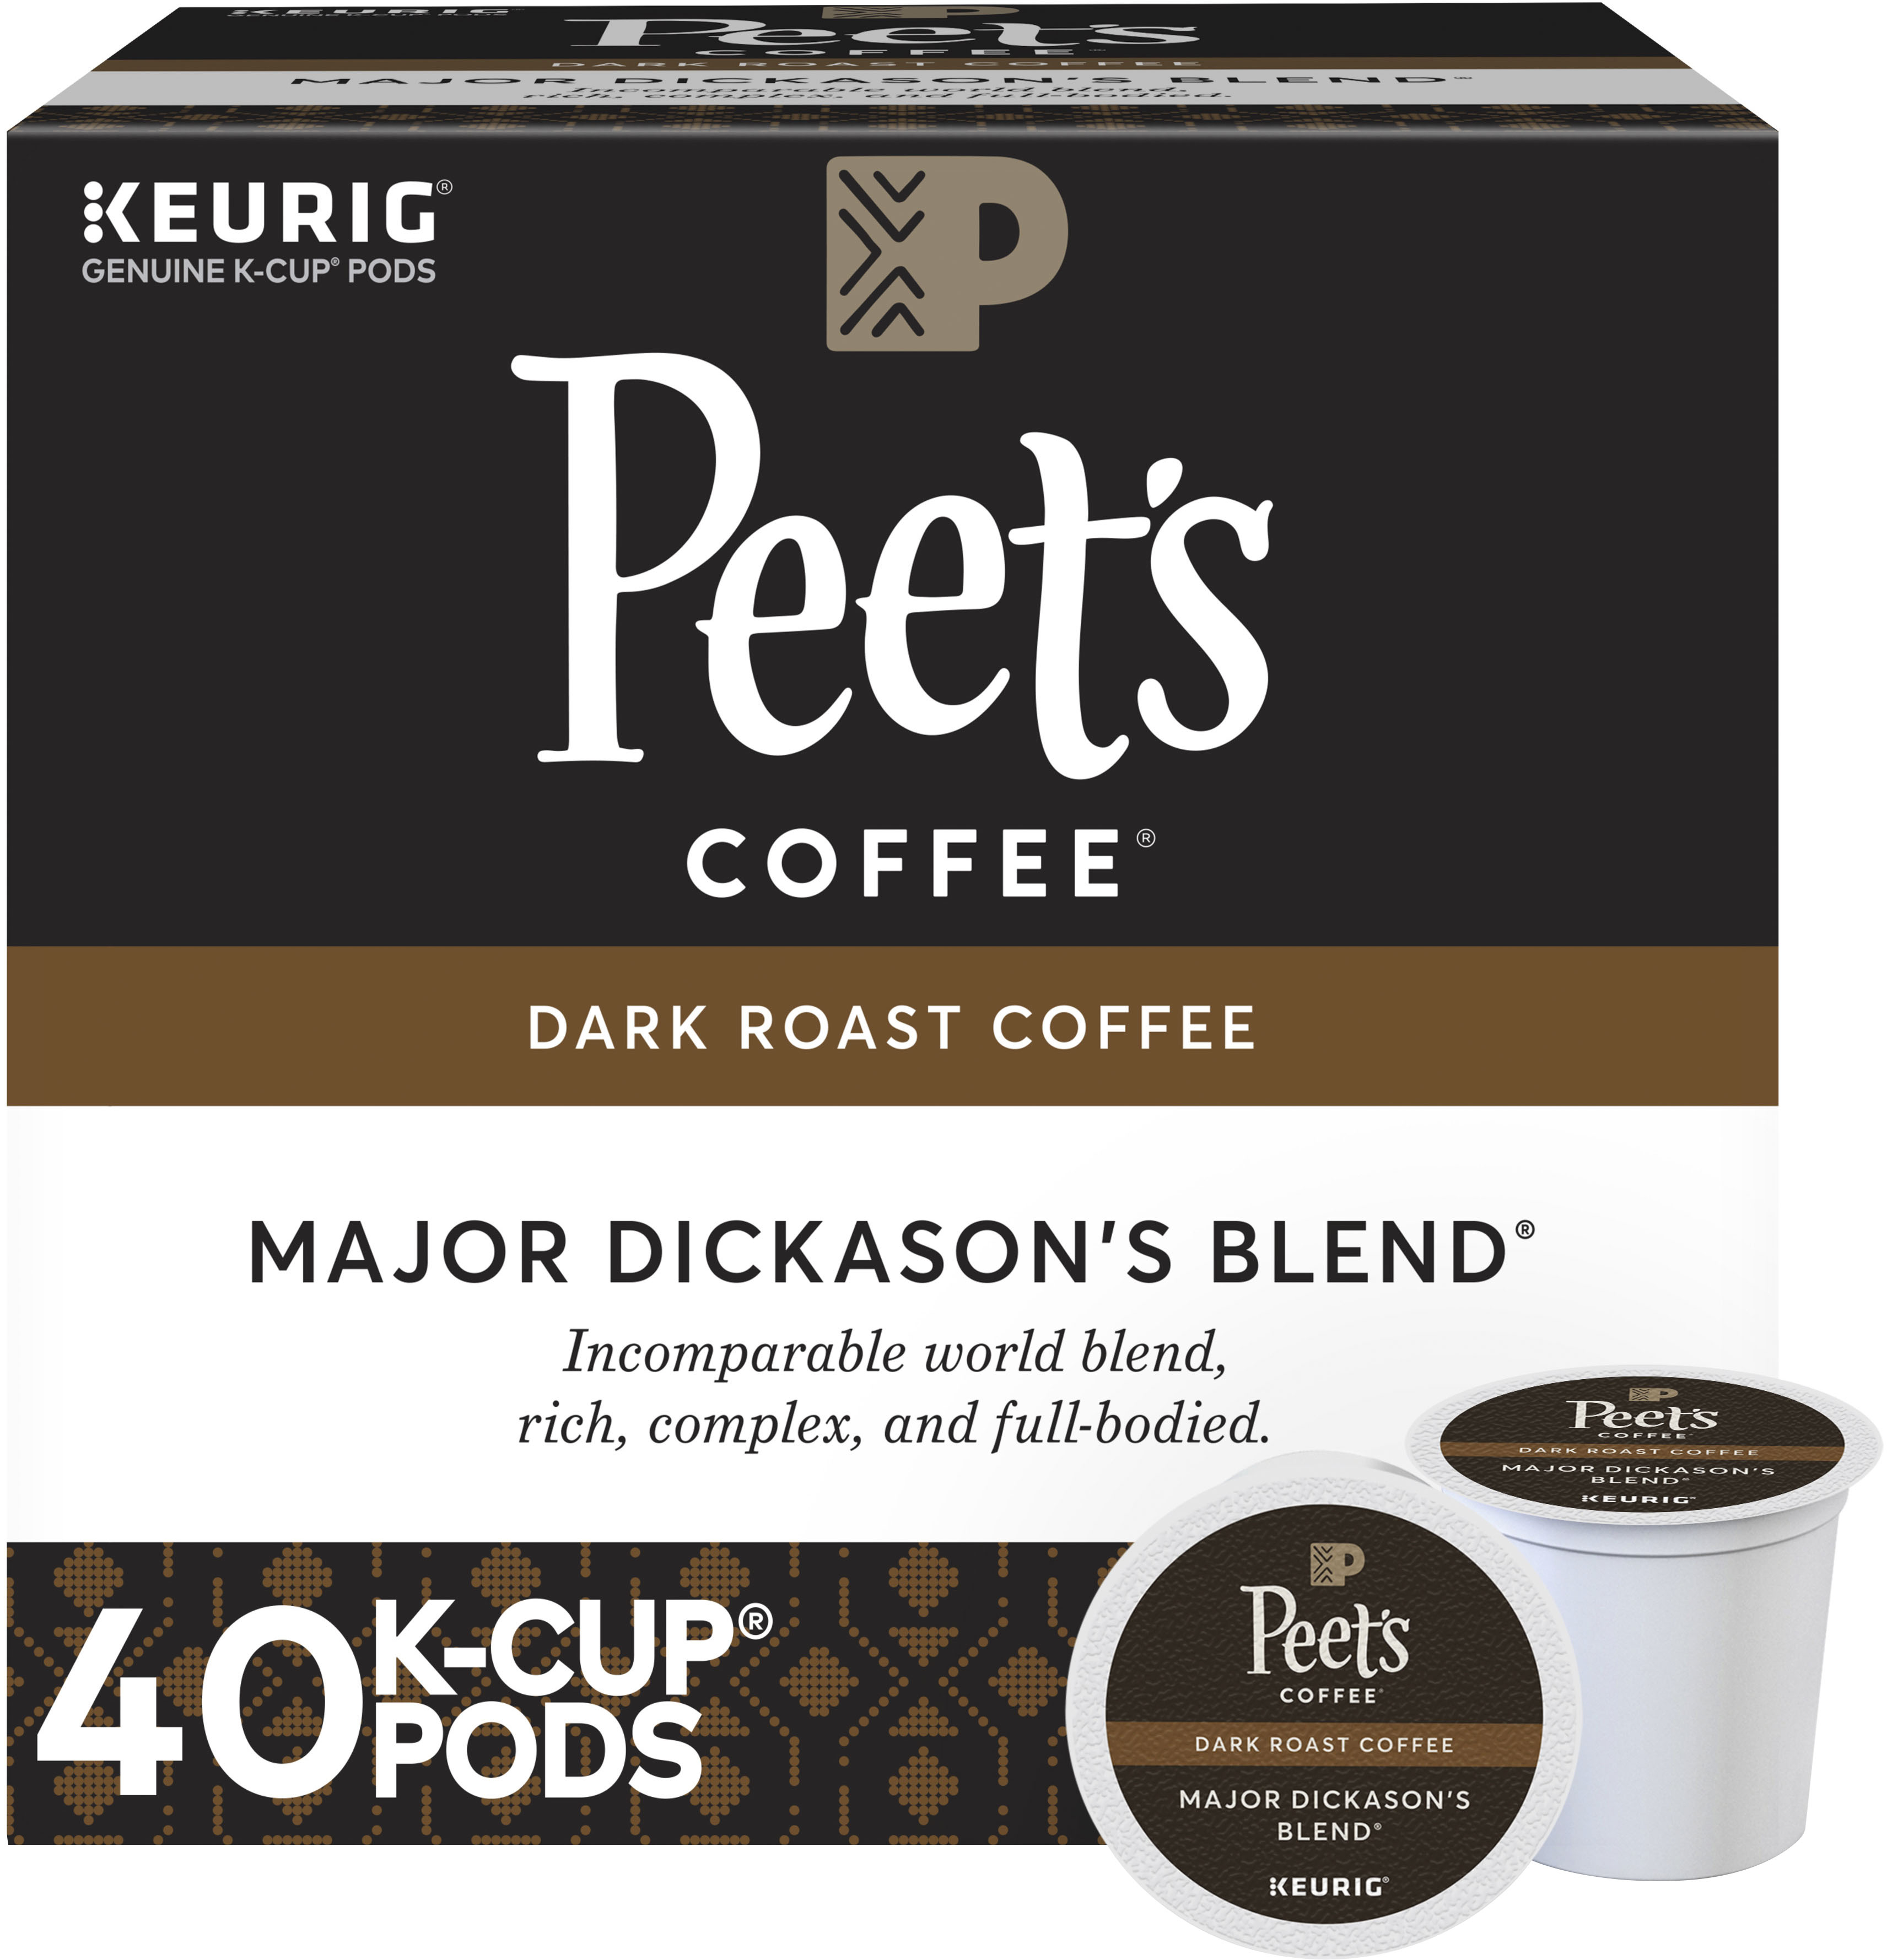  Peet's Coffee Gifts, Espresso Coffee Pods Variety Pack